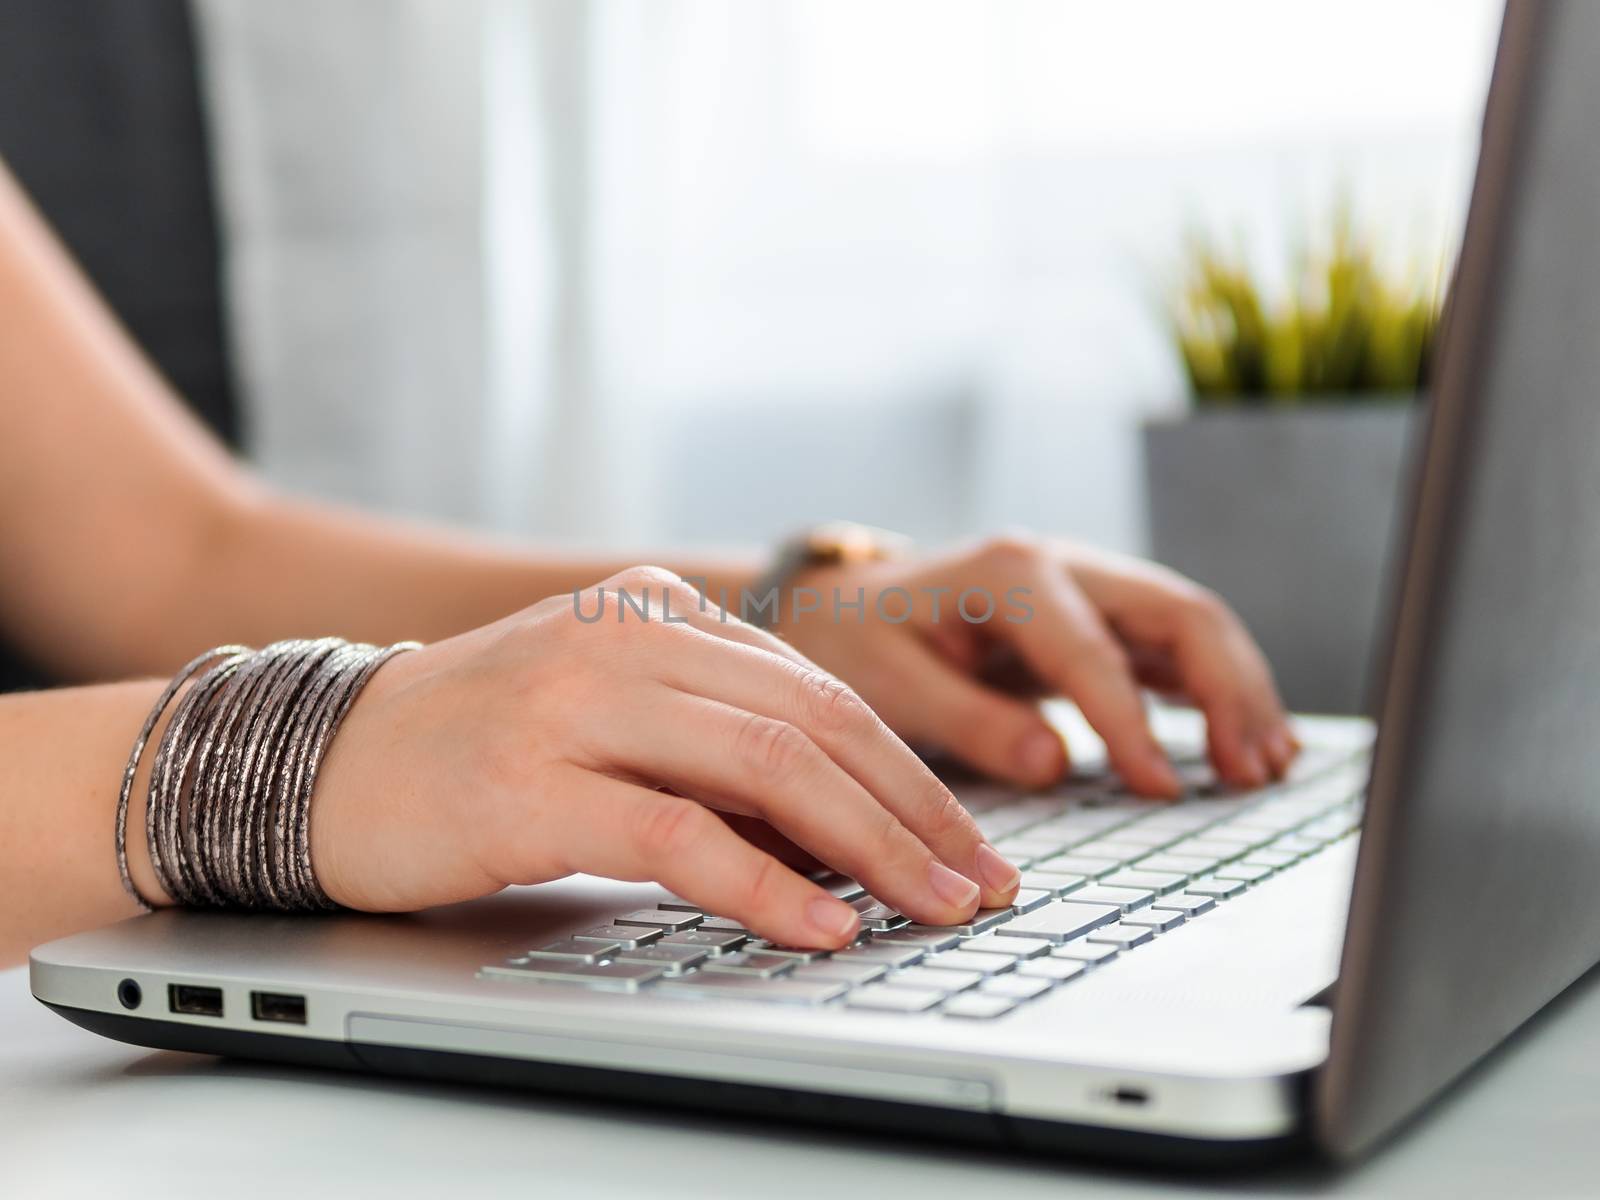 Working from home, contractor, freelance, social media, social marketing concept. Close-up woman's hands typing on laptop keyboard at home. Copy space for text or design